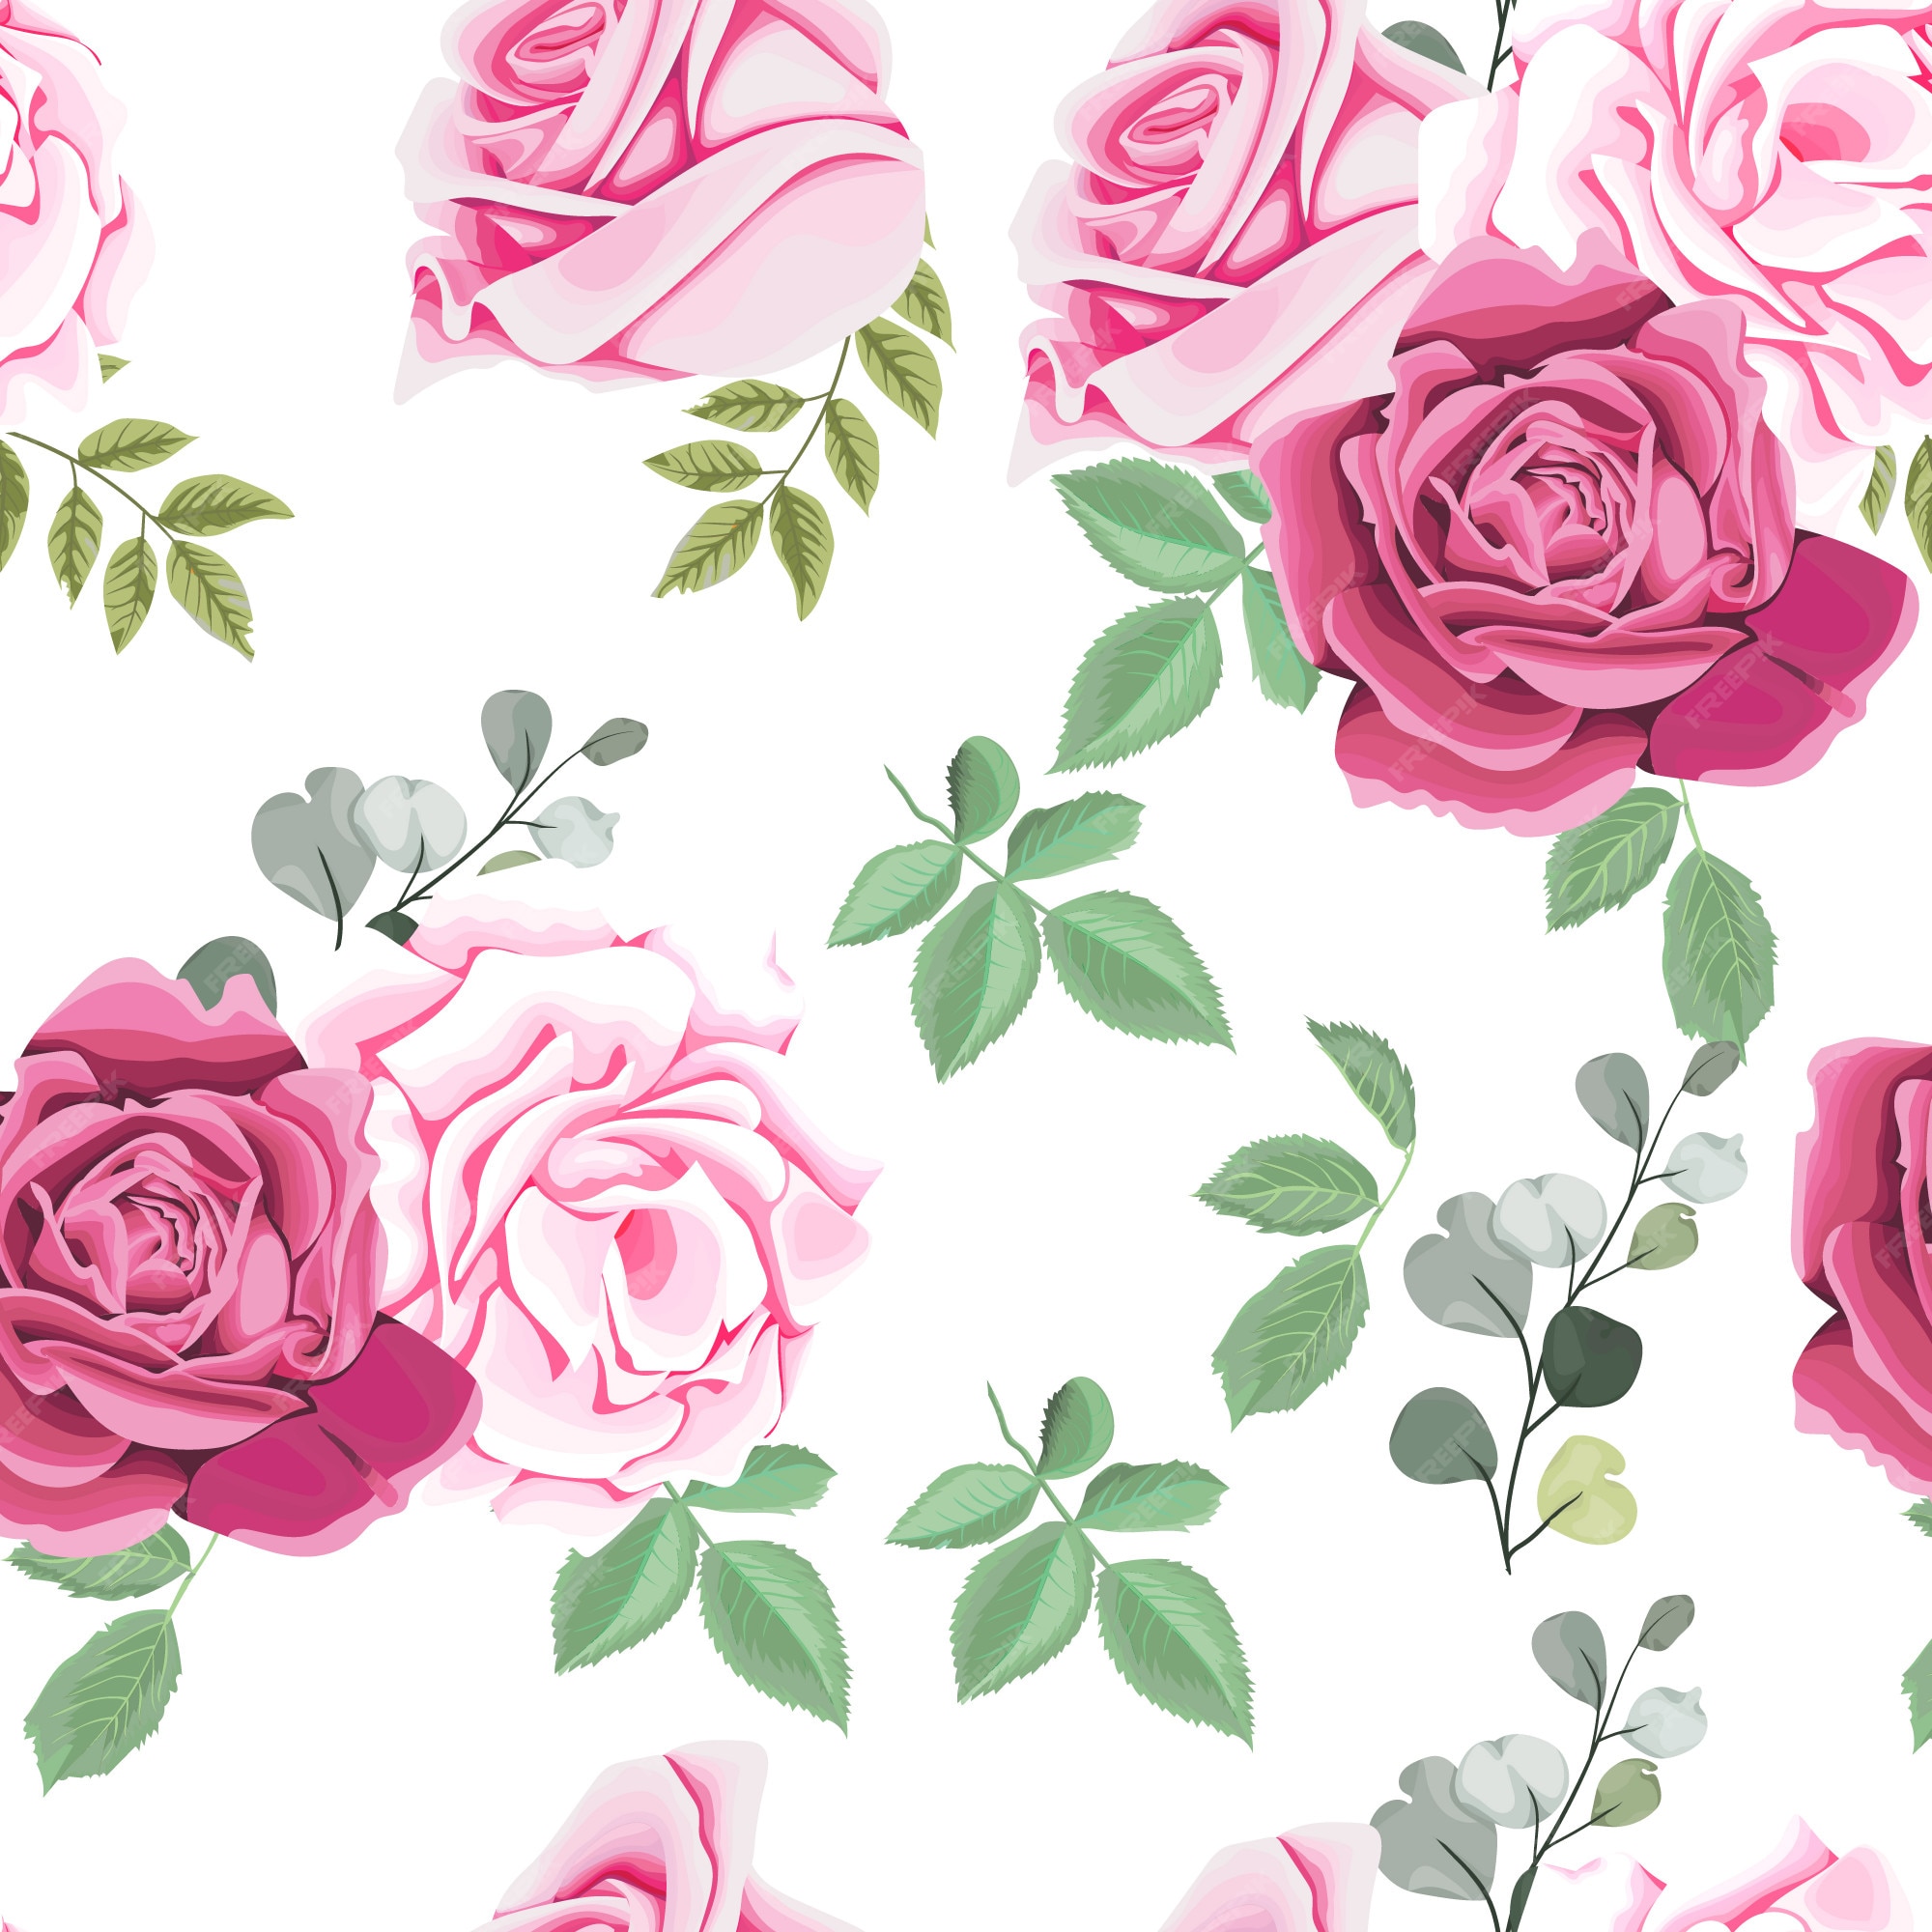 Premium Vector | Seamless pattern with beautiful floral